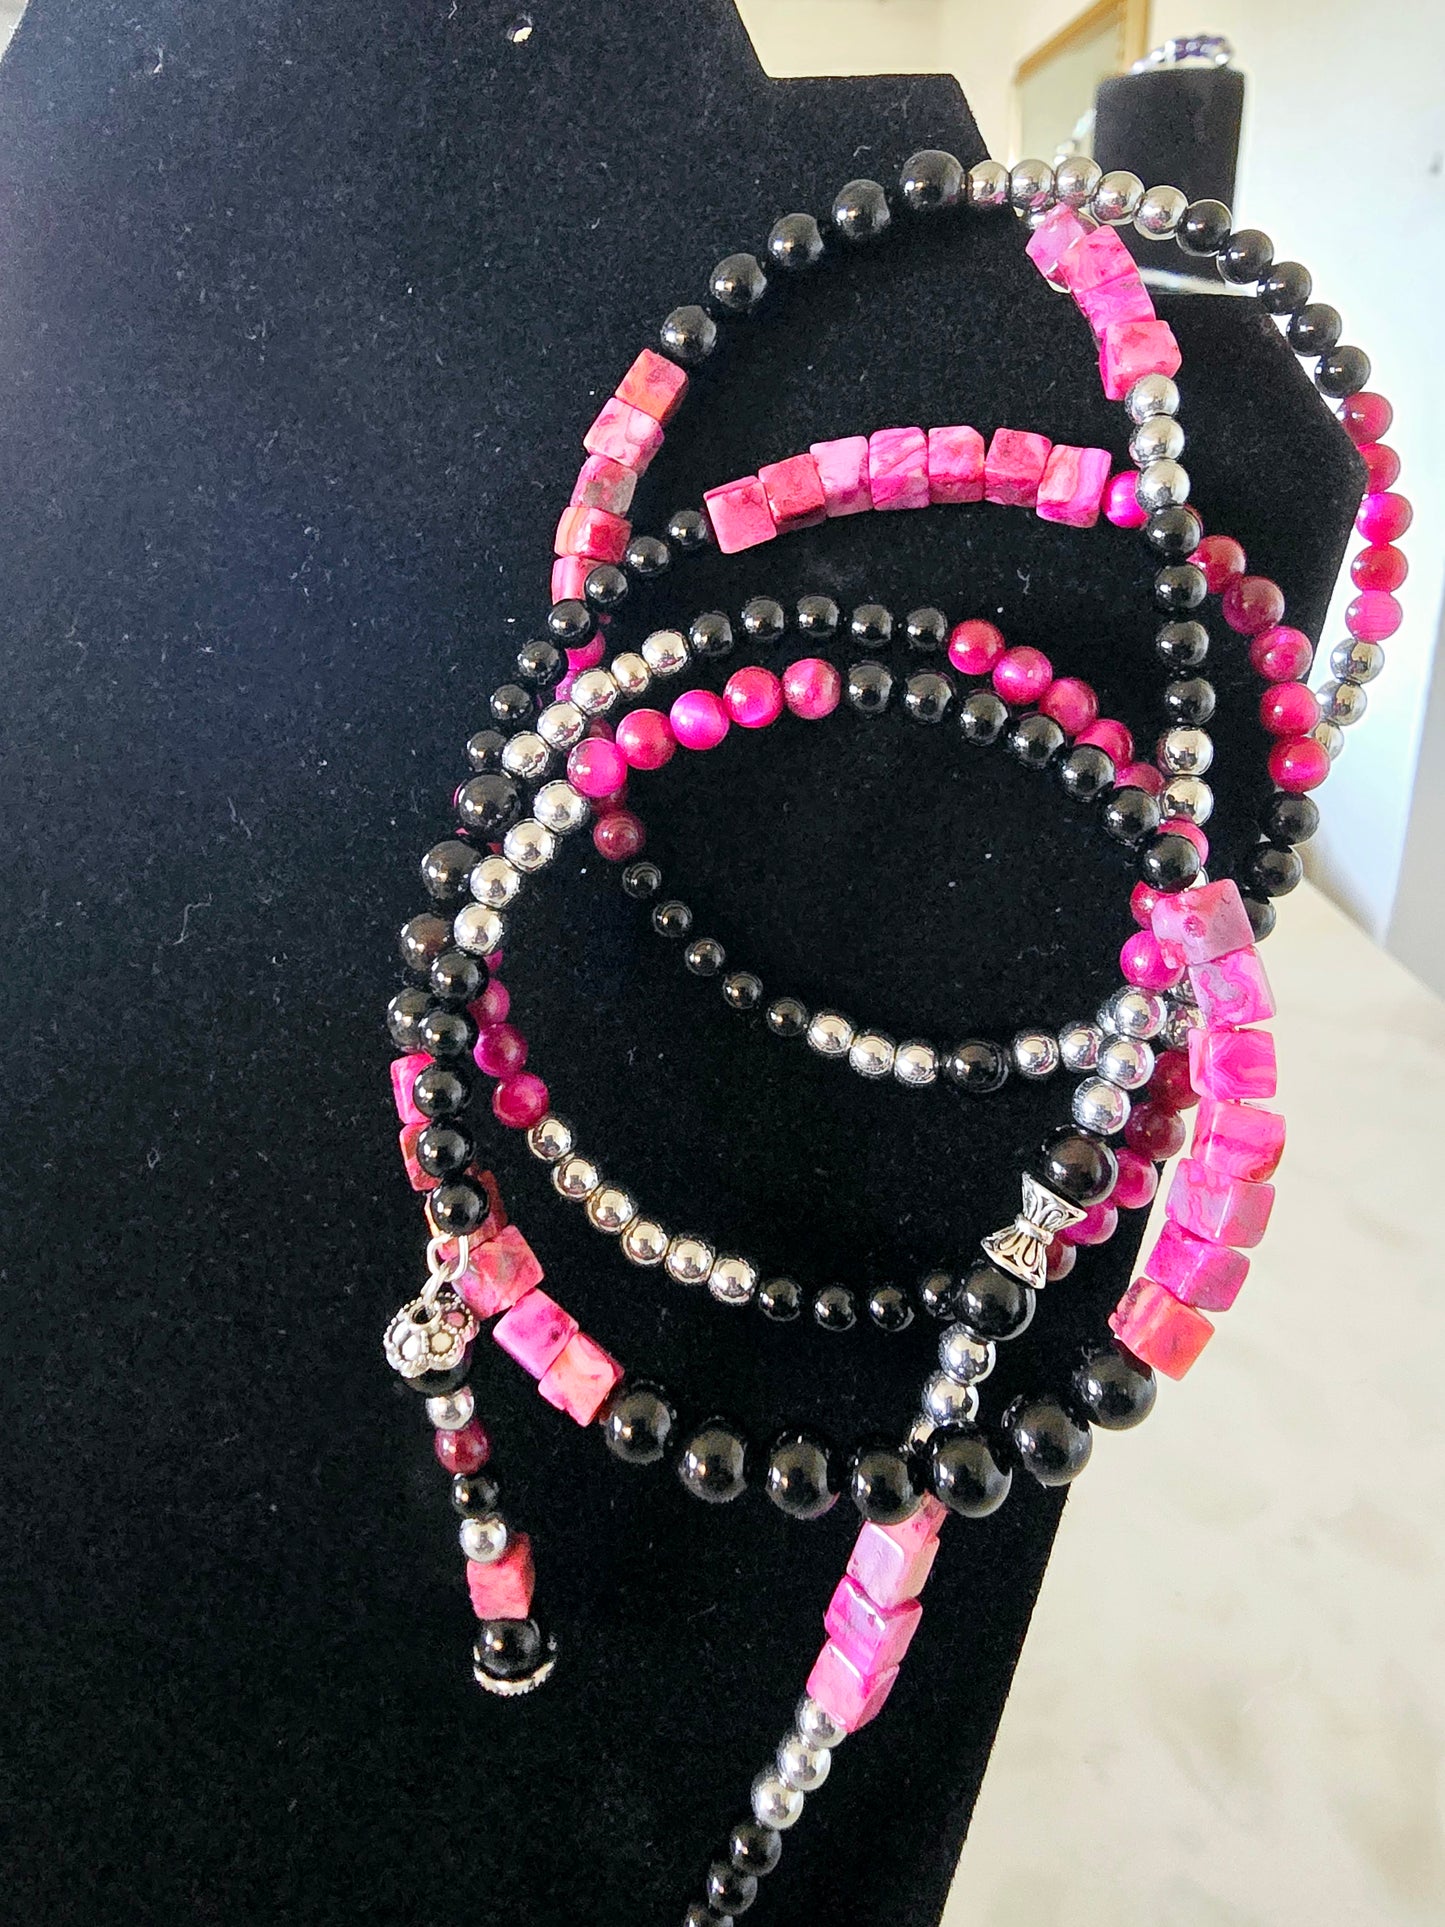 Beaded Memory Wire Bracelet and Necklace Set with Black Onyx and Pink Striped Beads Silver Charm Gift For Her